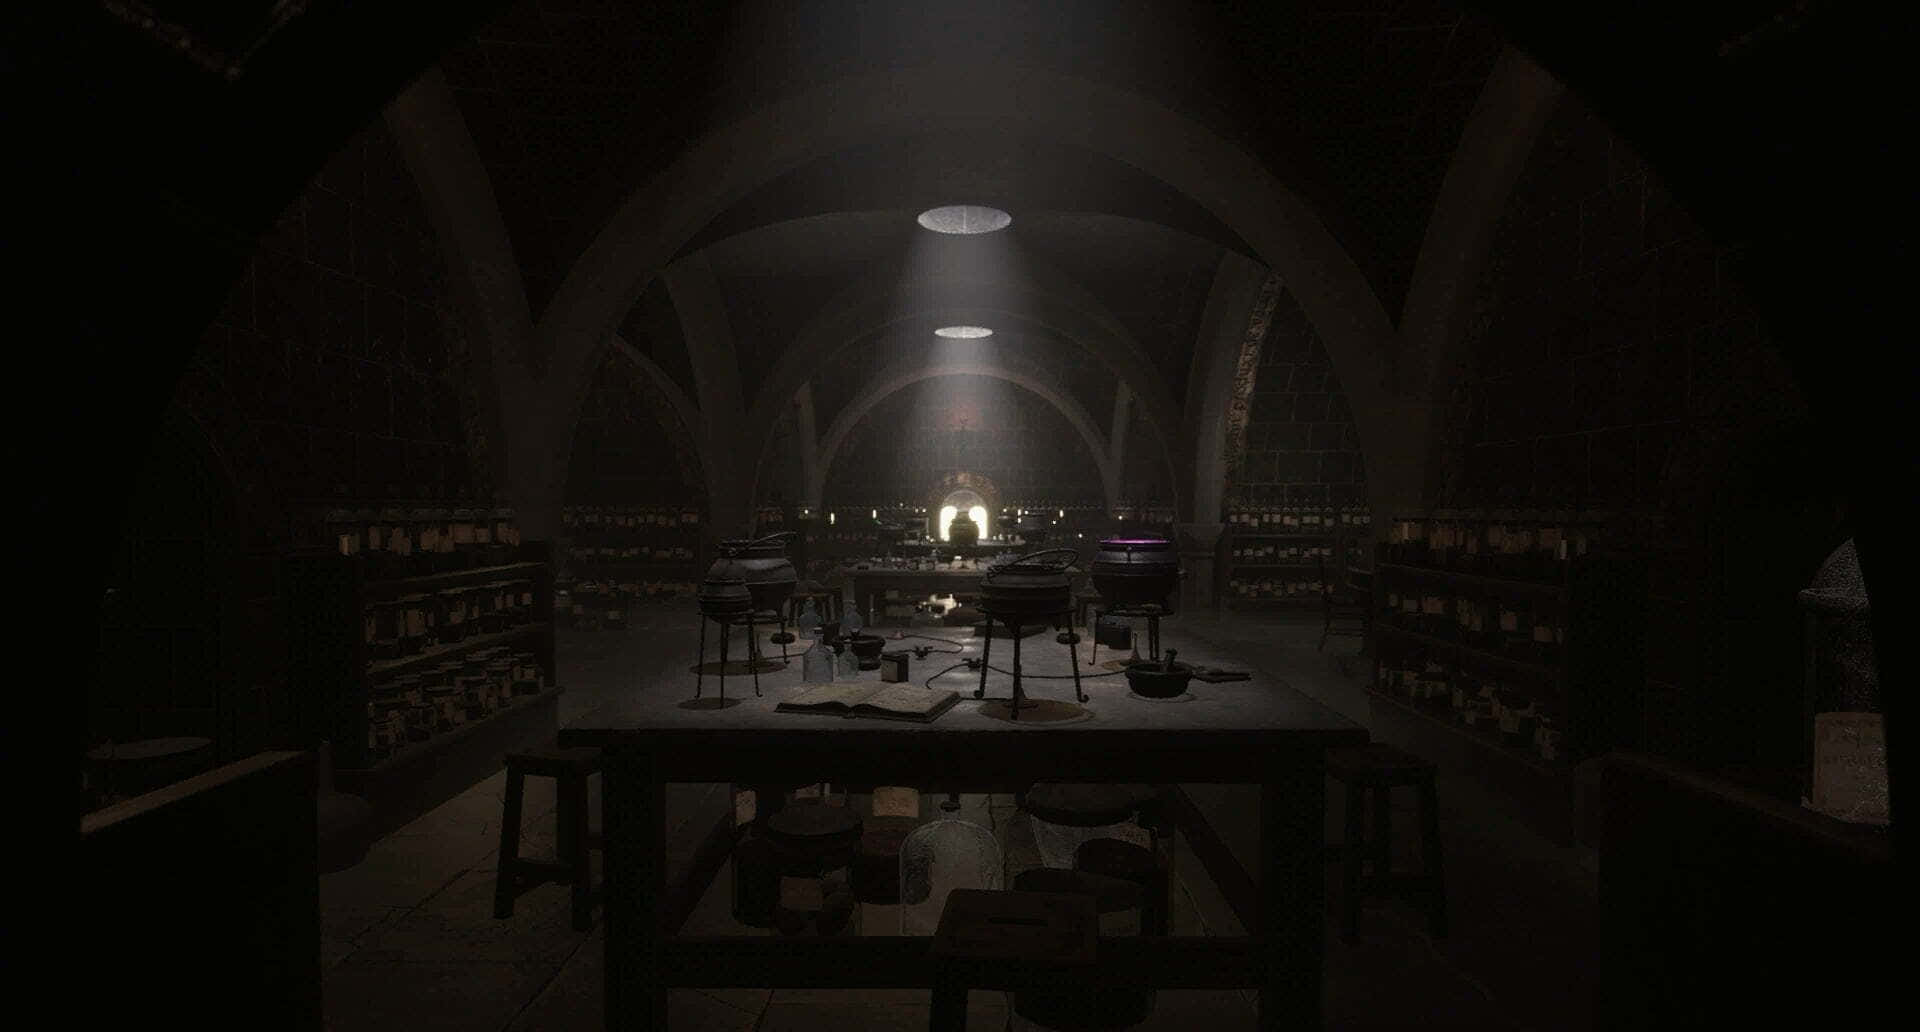 "The Hogwarts Potions Class - Conjuring Up Exciting Potions with Professor Snape" Wallpaper